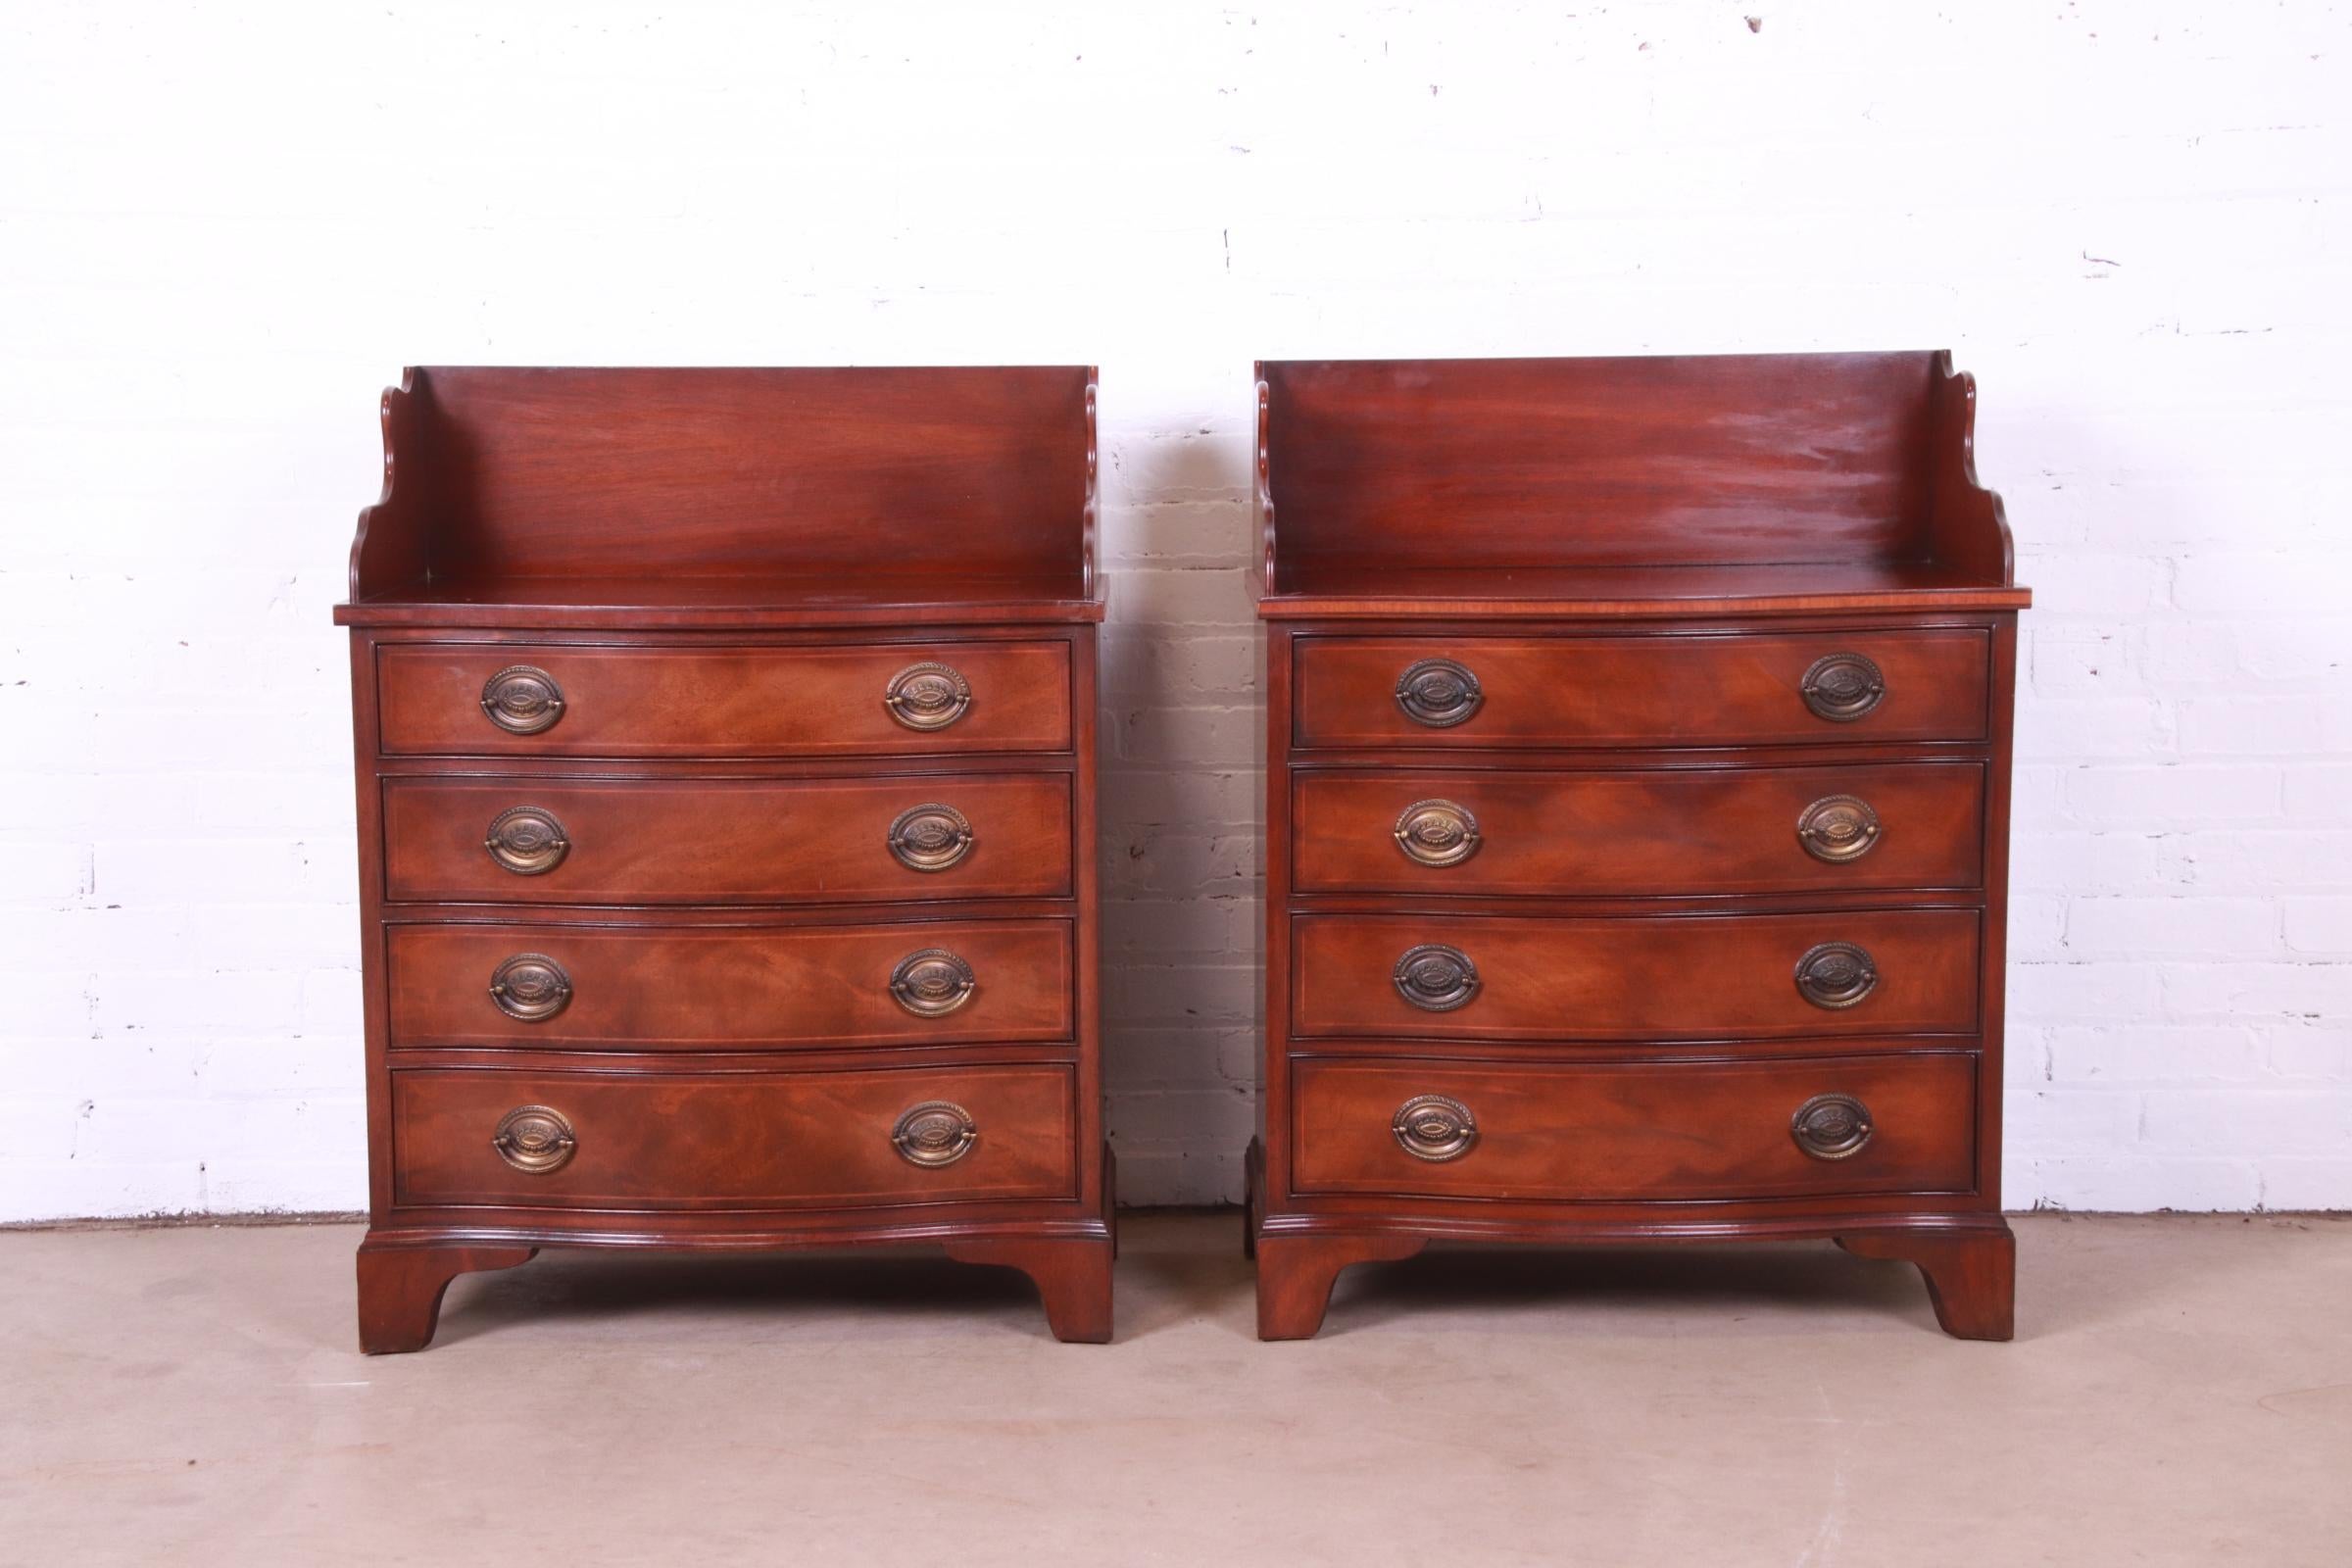 American Henredon Georgian Inlaid Mahogany Serpentine Bachelor Chests or Nightstands For Sale